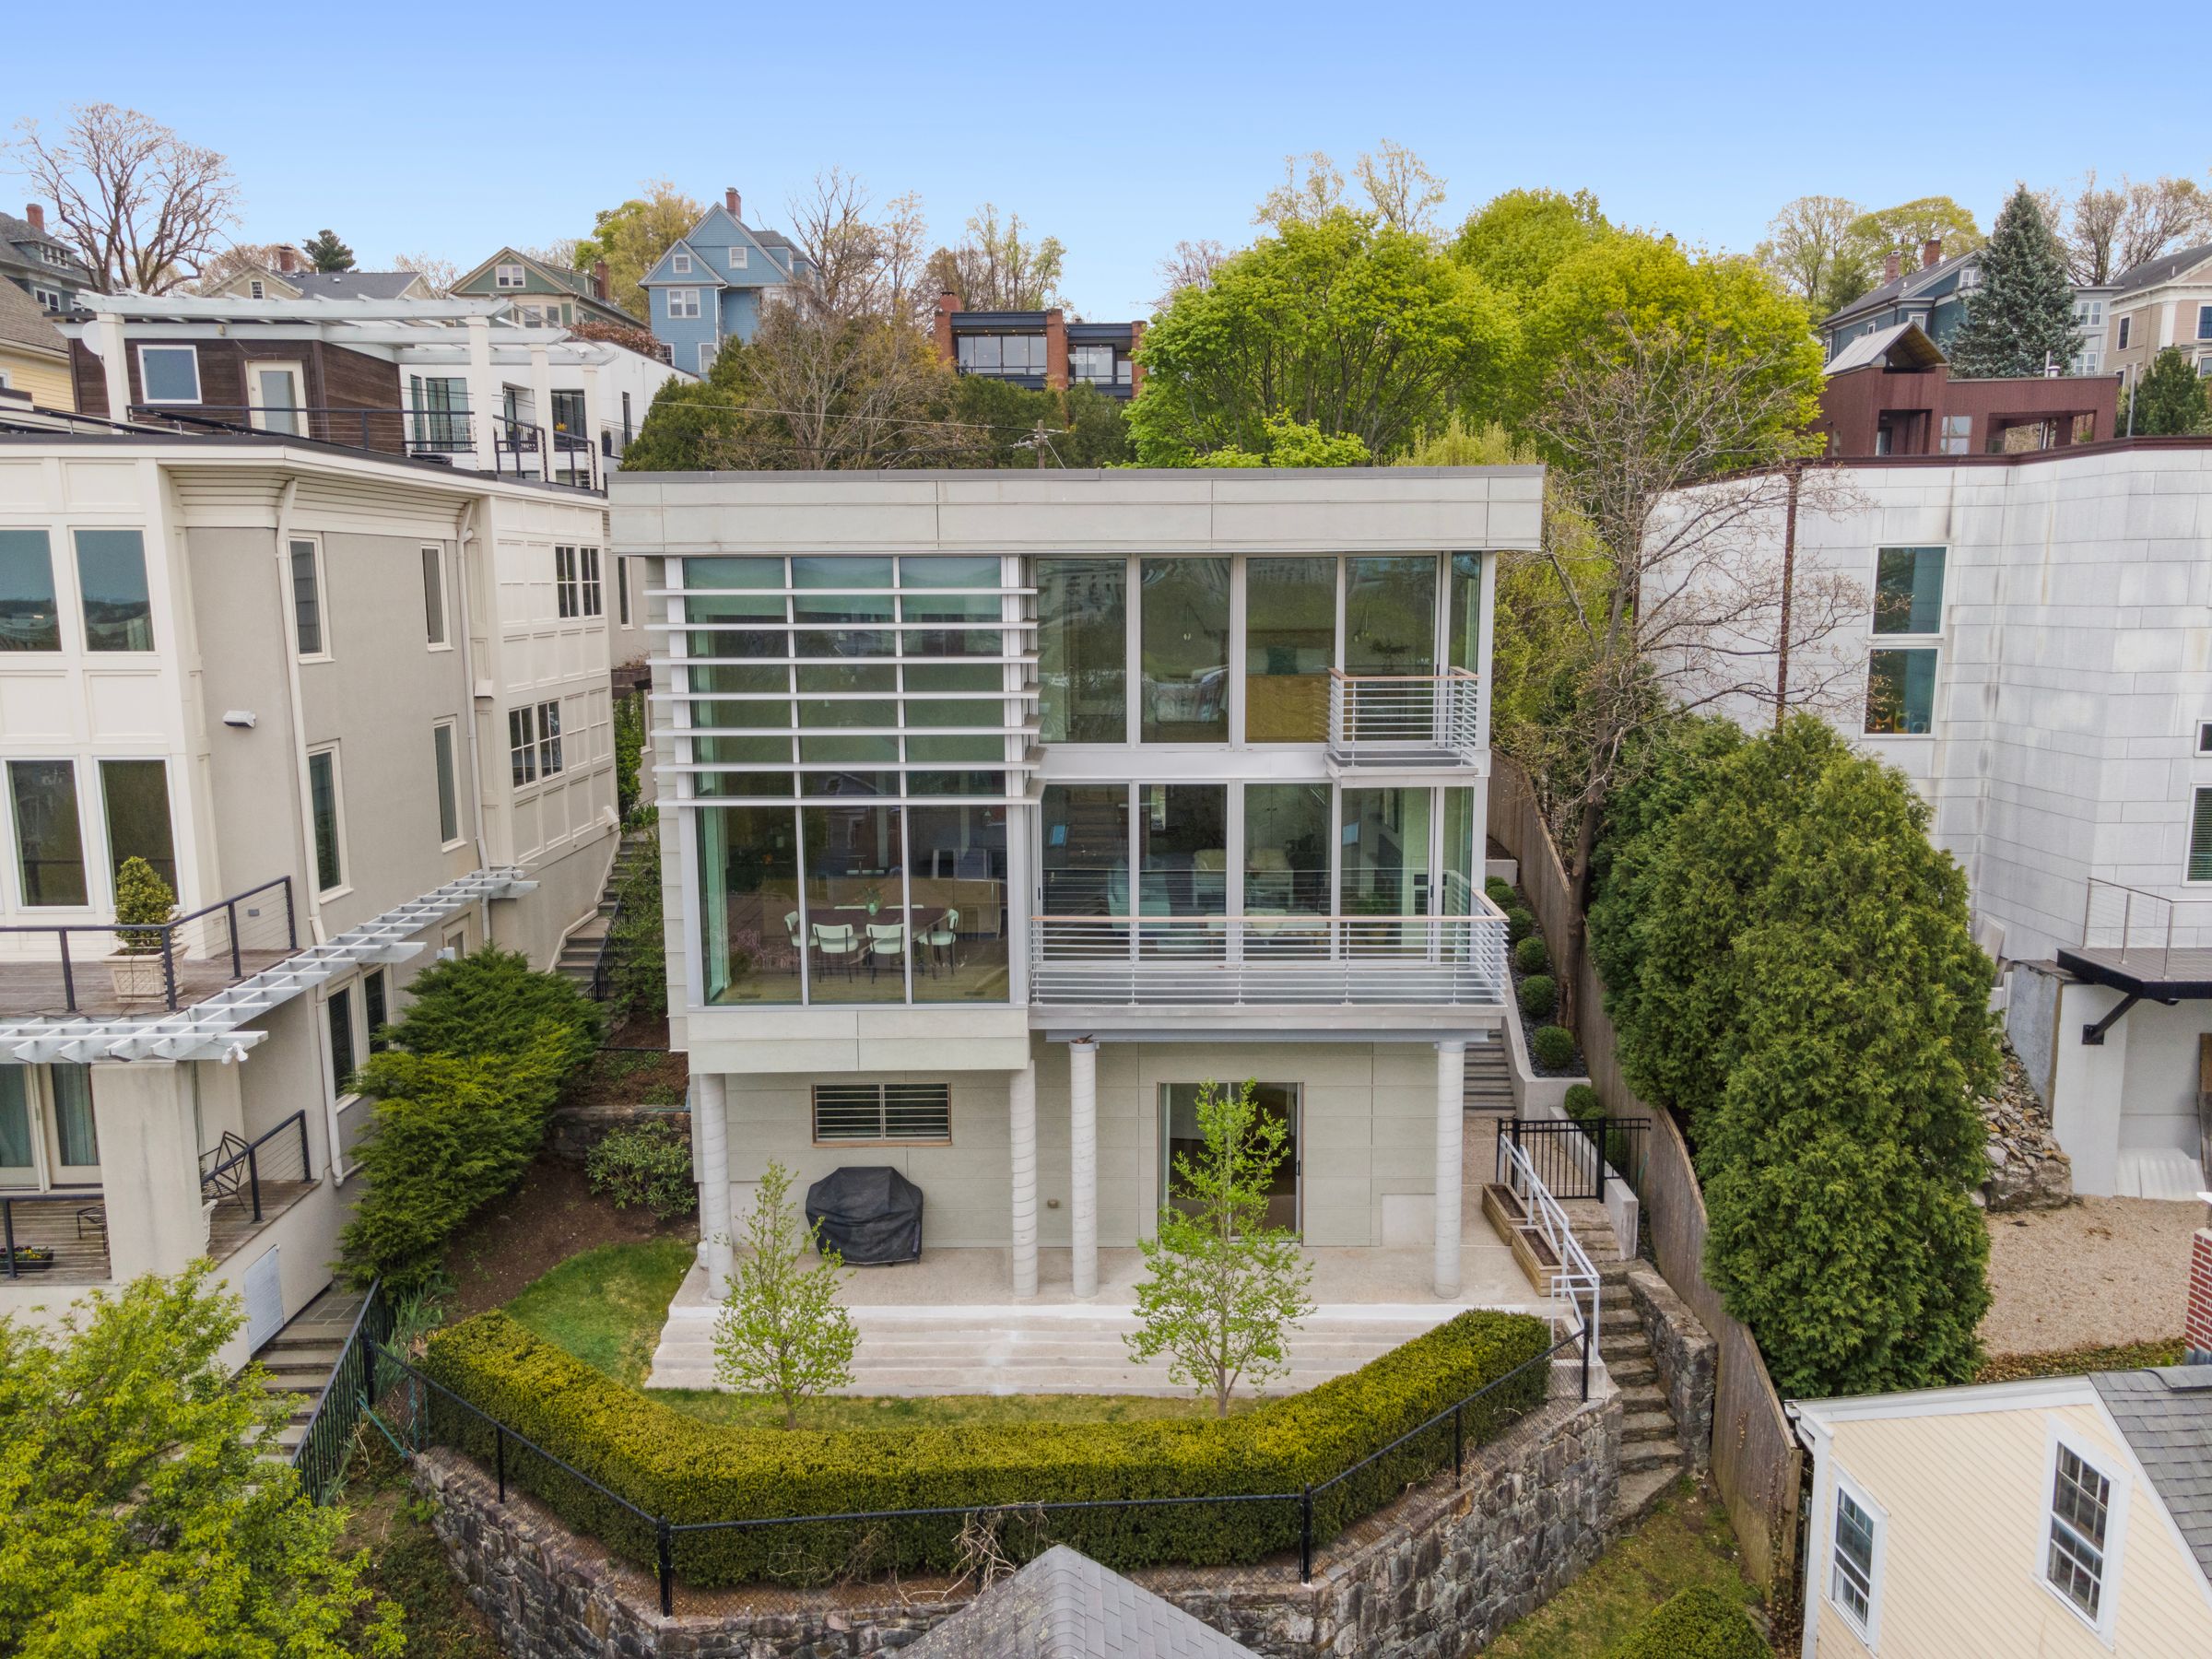 Architect Behind WWII Memorial Designed Modern Providence Mansion, Sells for $2.2 Million with Kevin Fox of Compass